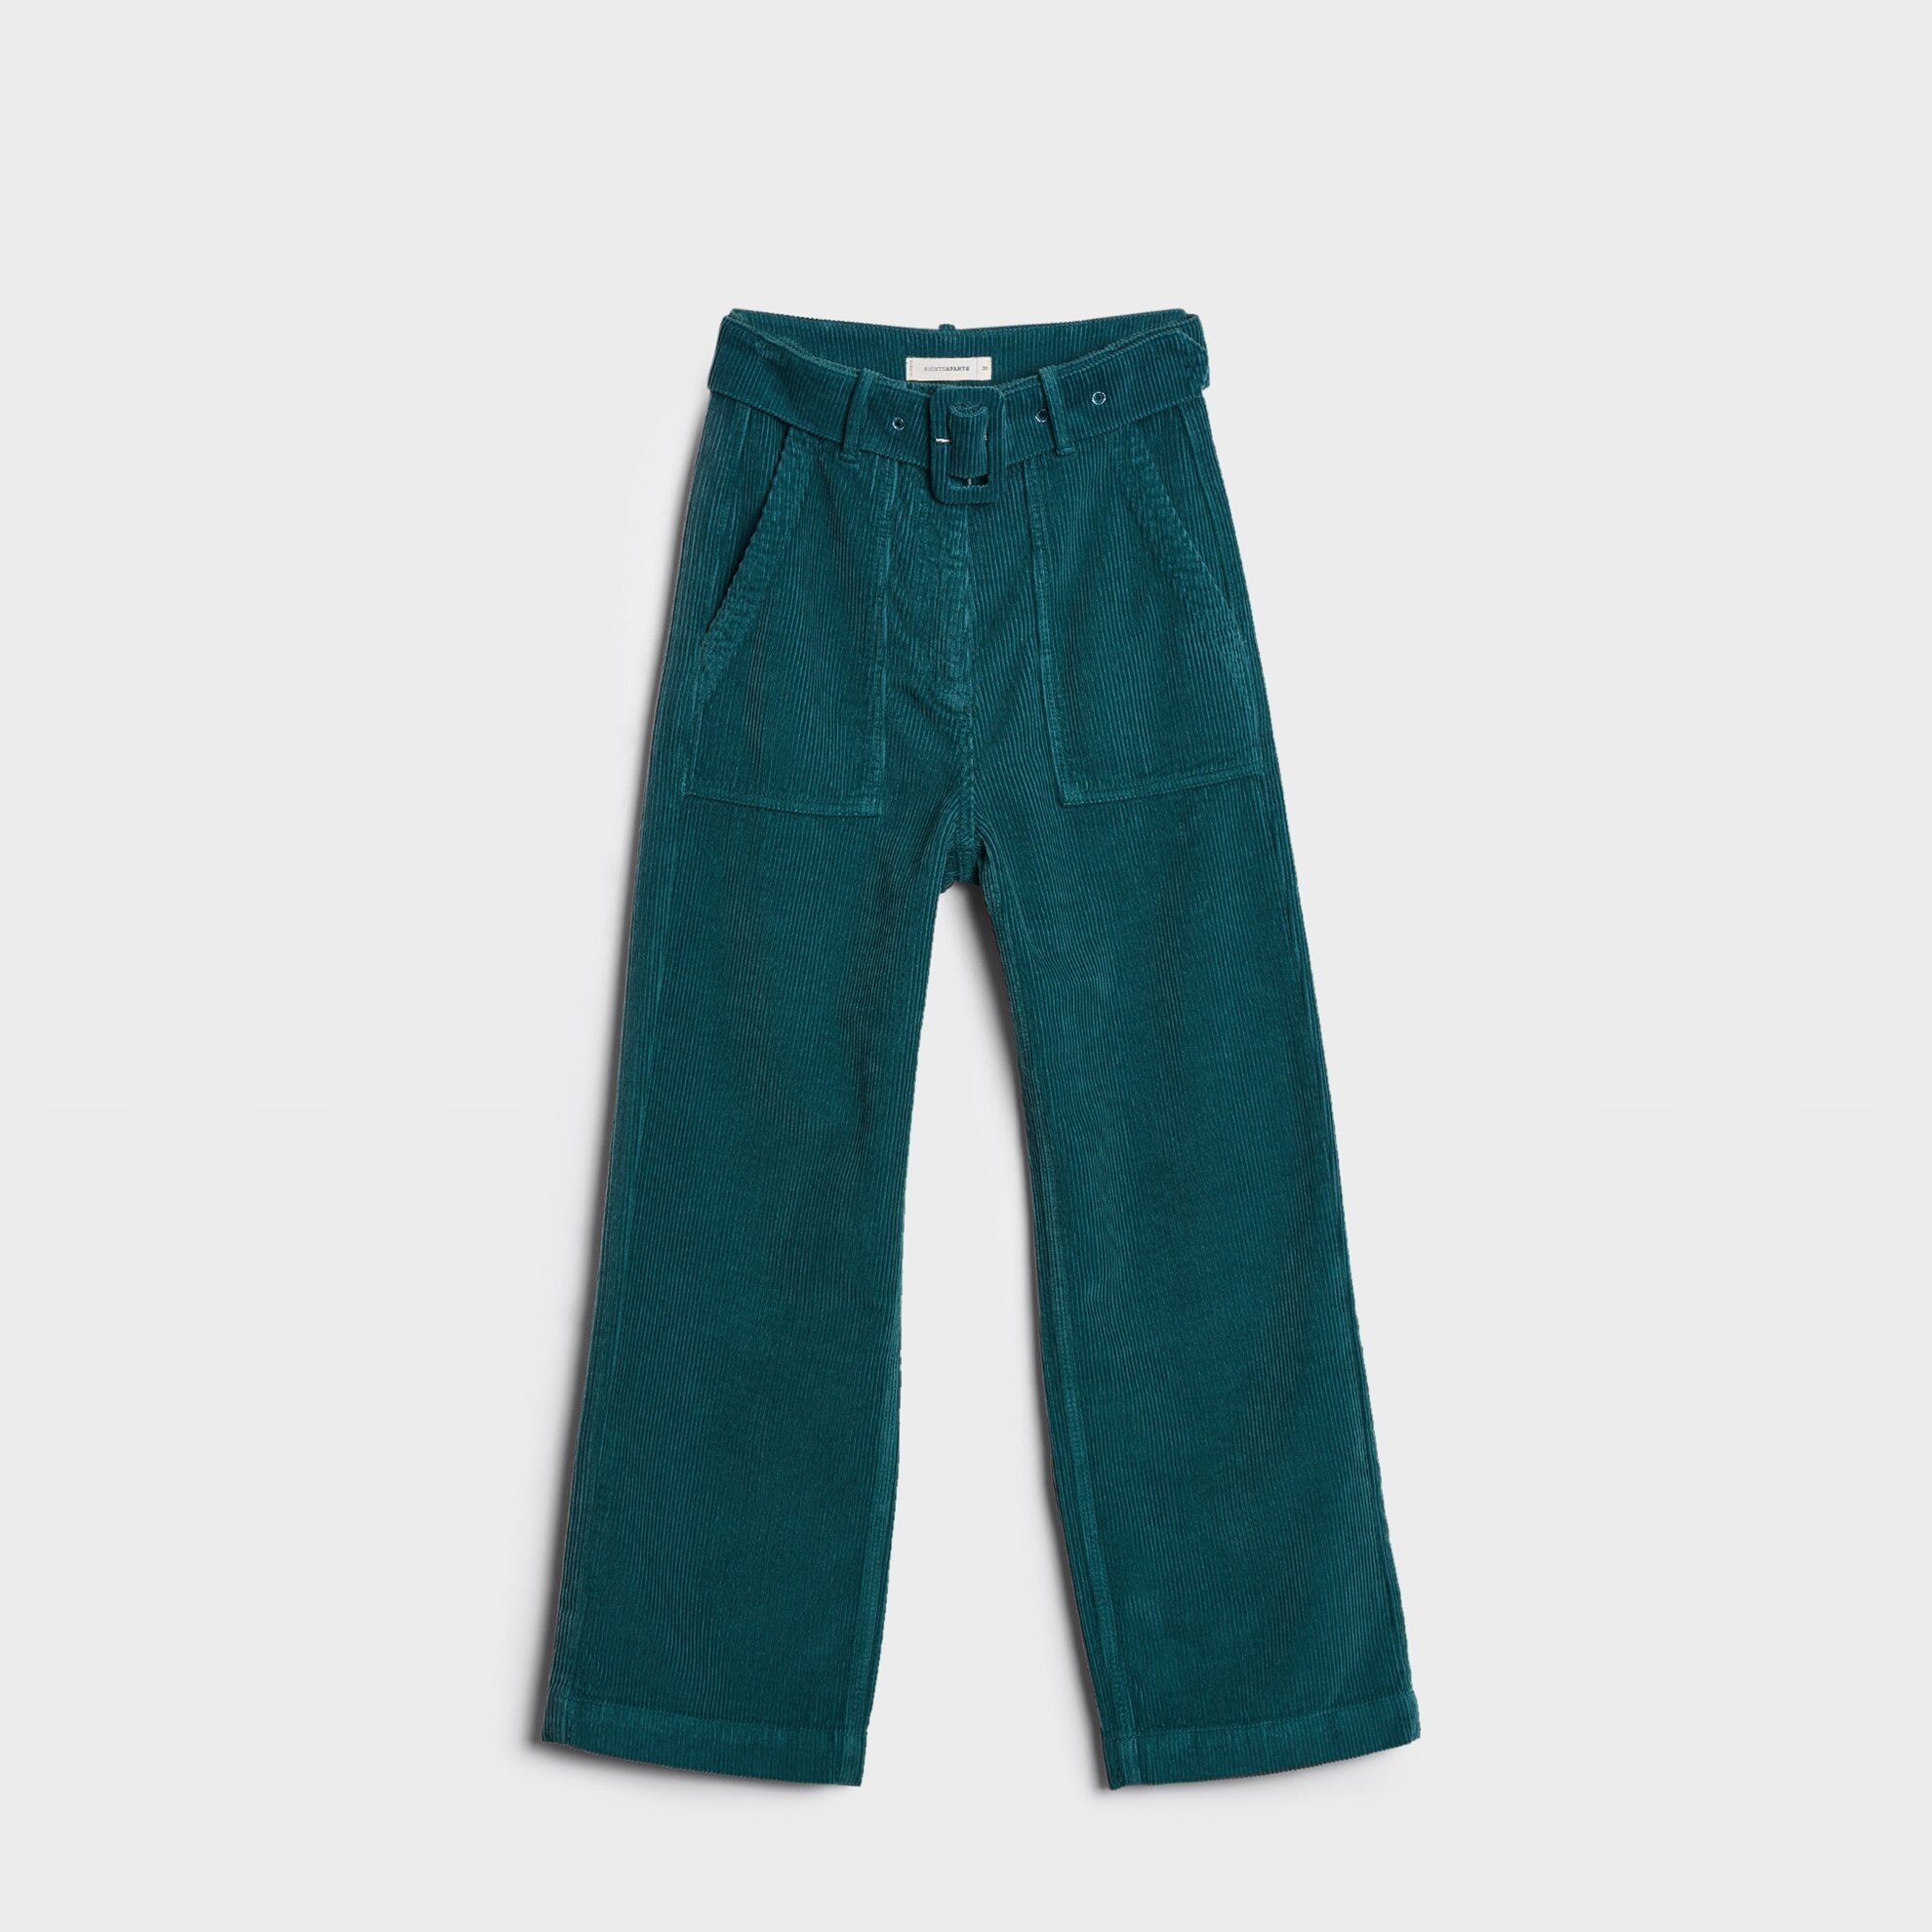 Belted Corduroy Trousers